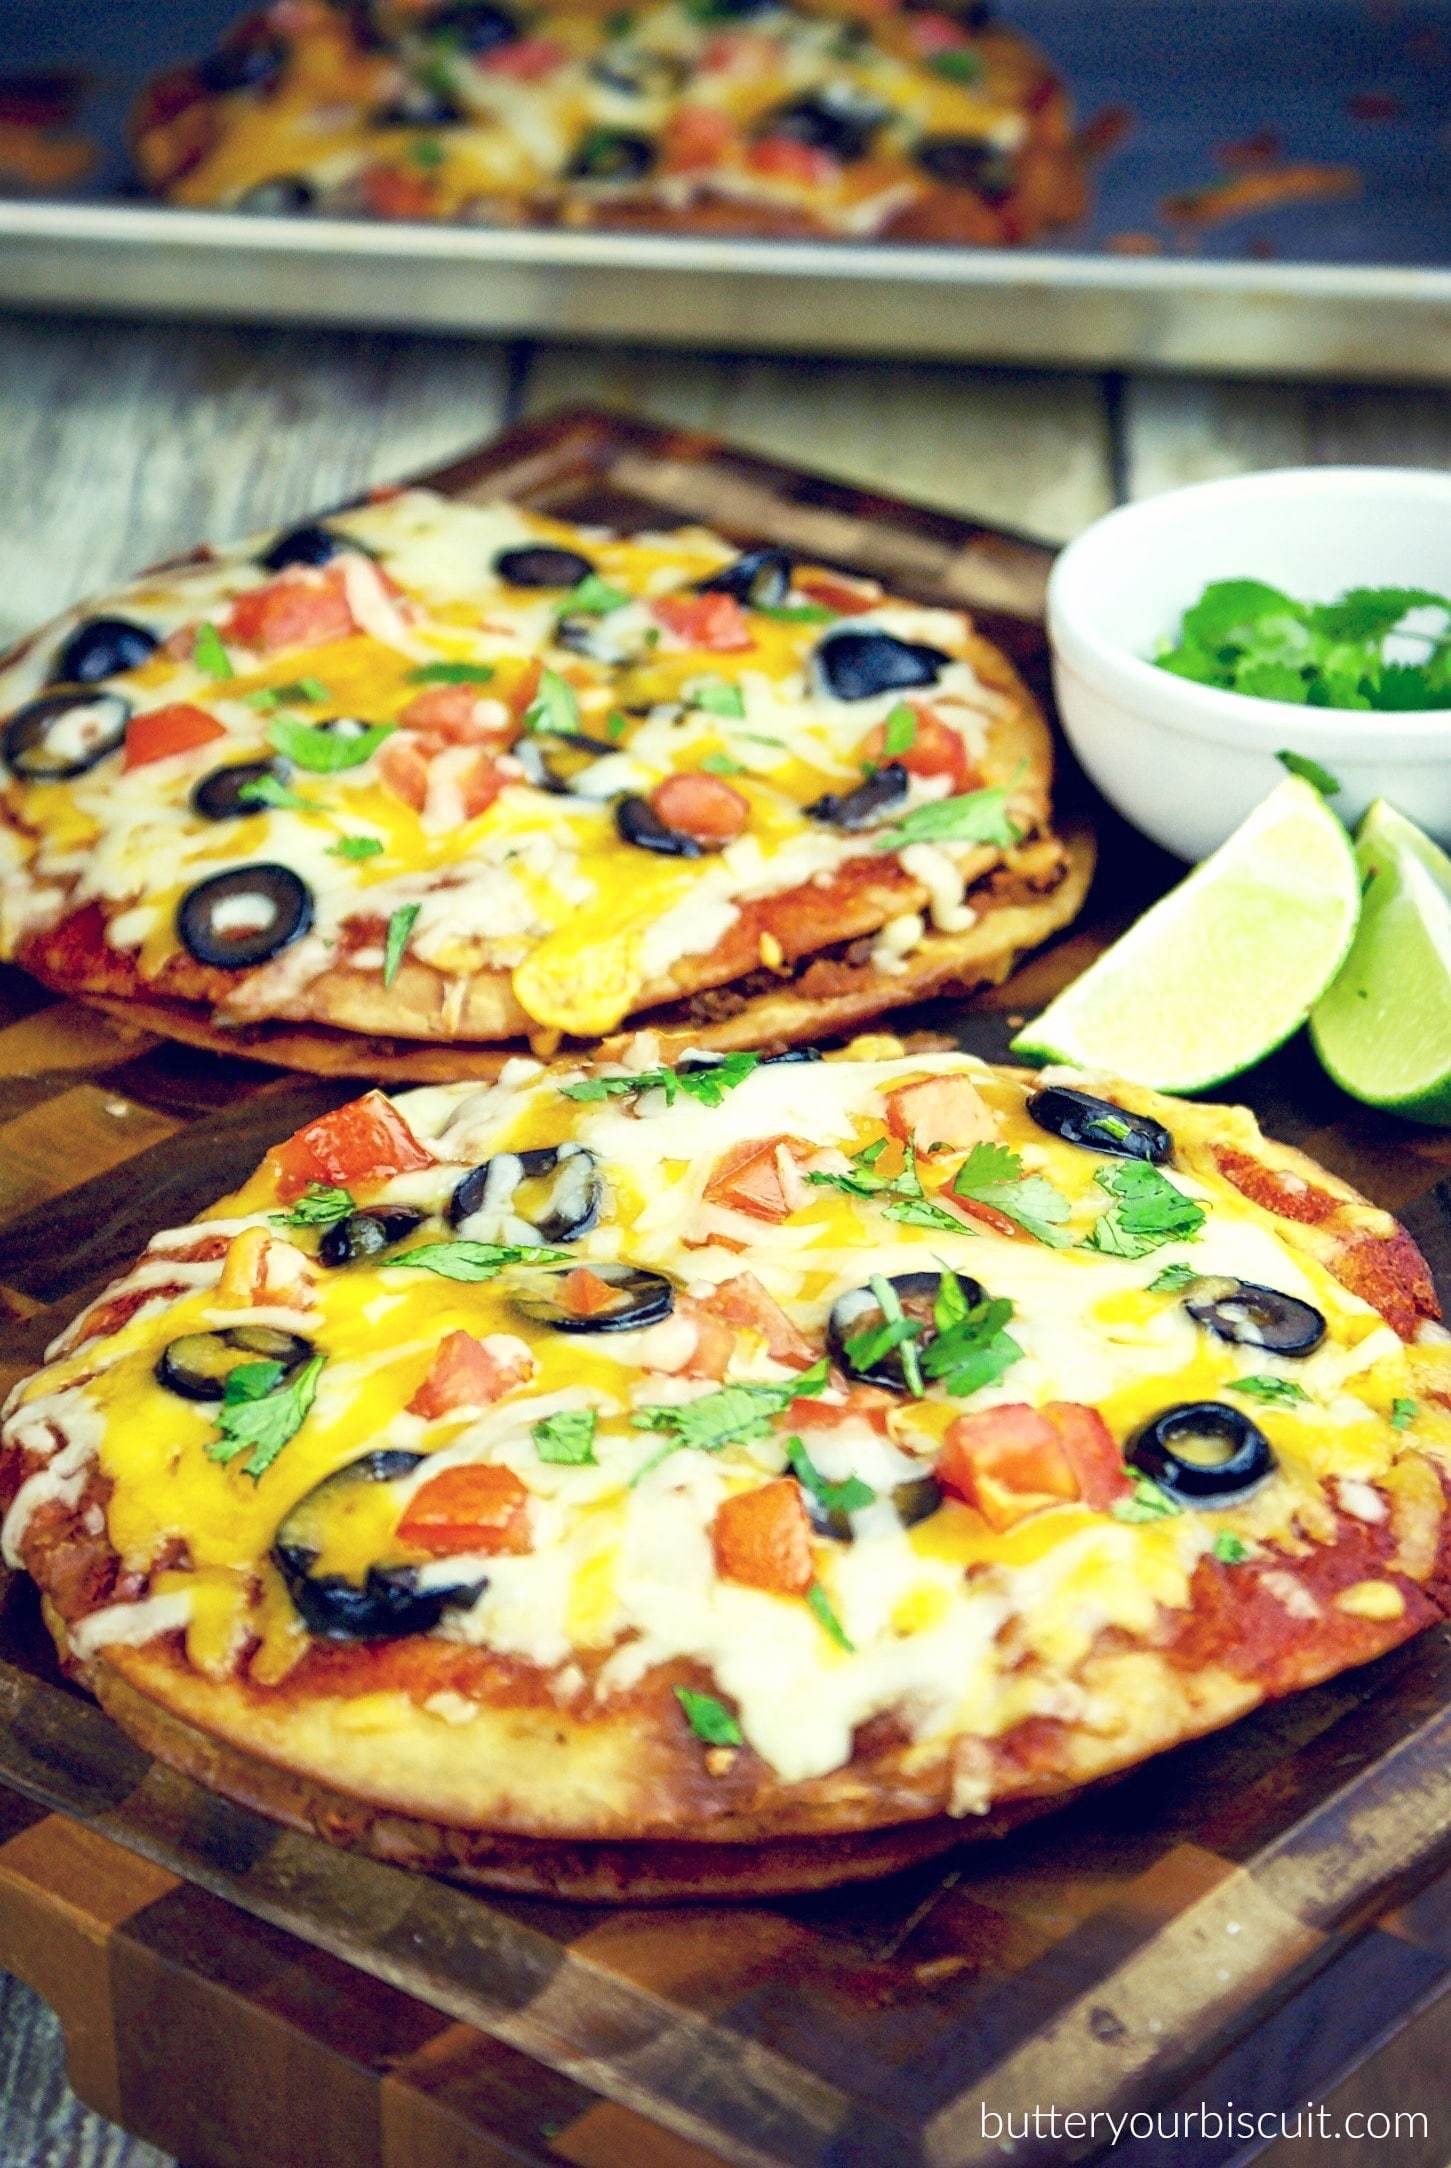 Best Pizza Recipes - Easy Mexican Pizza - Homemade Pizza Recipe Ideas for Healthy, Easy Dinner, Lunch and Snacks - How To Make Pizza Dough at Home - Step by Step Tutorials for Varieties with Pepperoni, Gourmet and Unique Tips With Pillsbury Biscuits, for Kids, With Chicken and French Bread - Thin Crust and Deep Dish Pizzas http://diyjoy.com/best-pizza-recipes